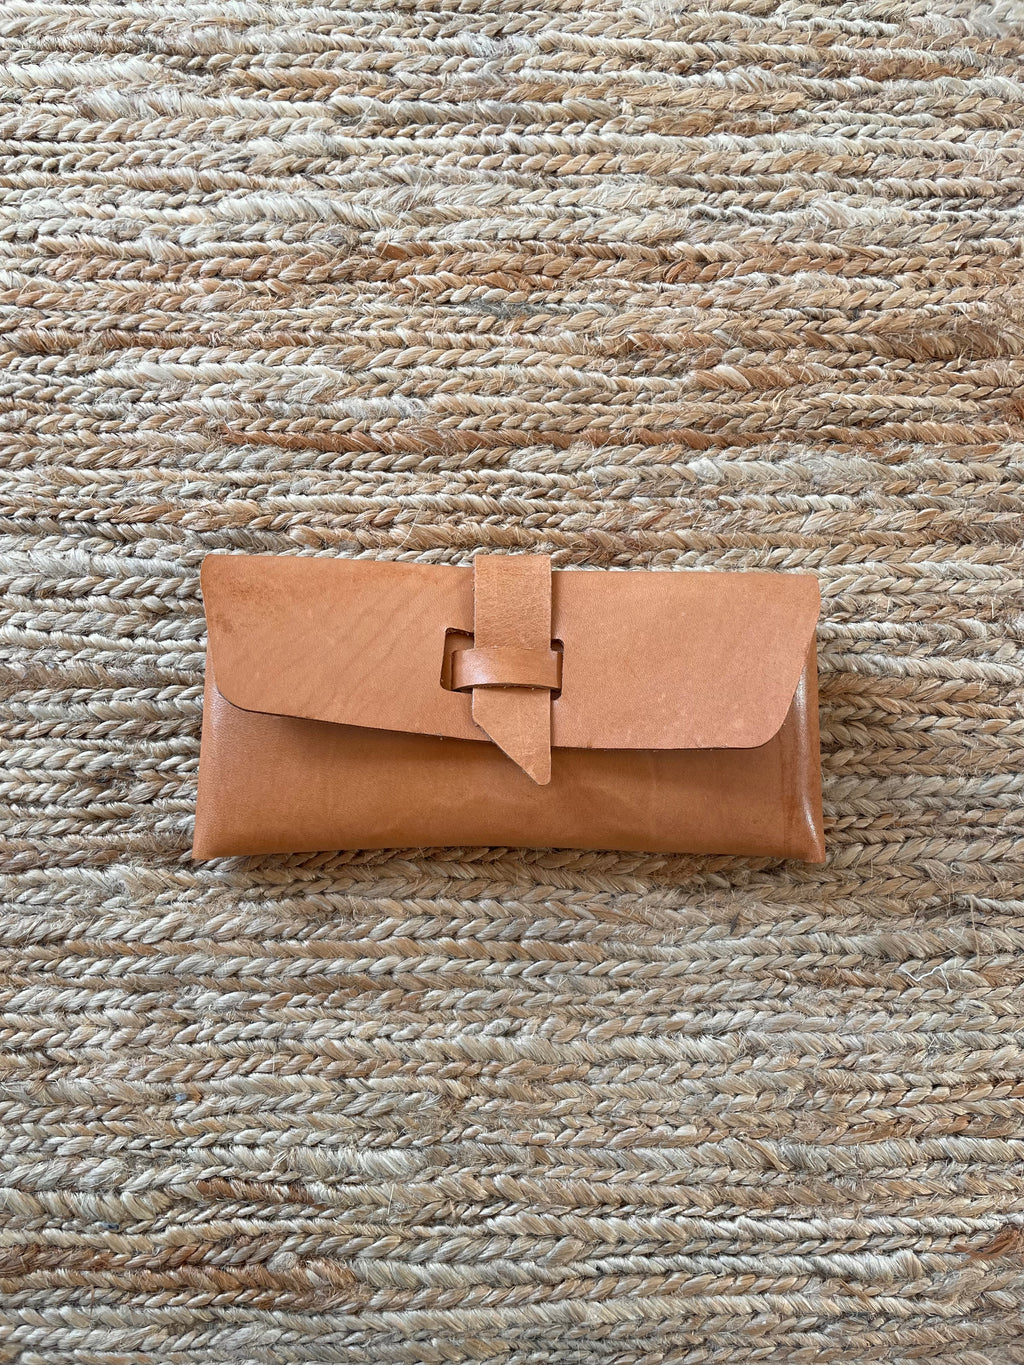 The Eye-Glasses Case / Pen Case | Vegetable Tanned Leather | Natural